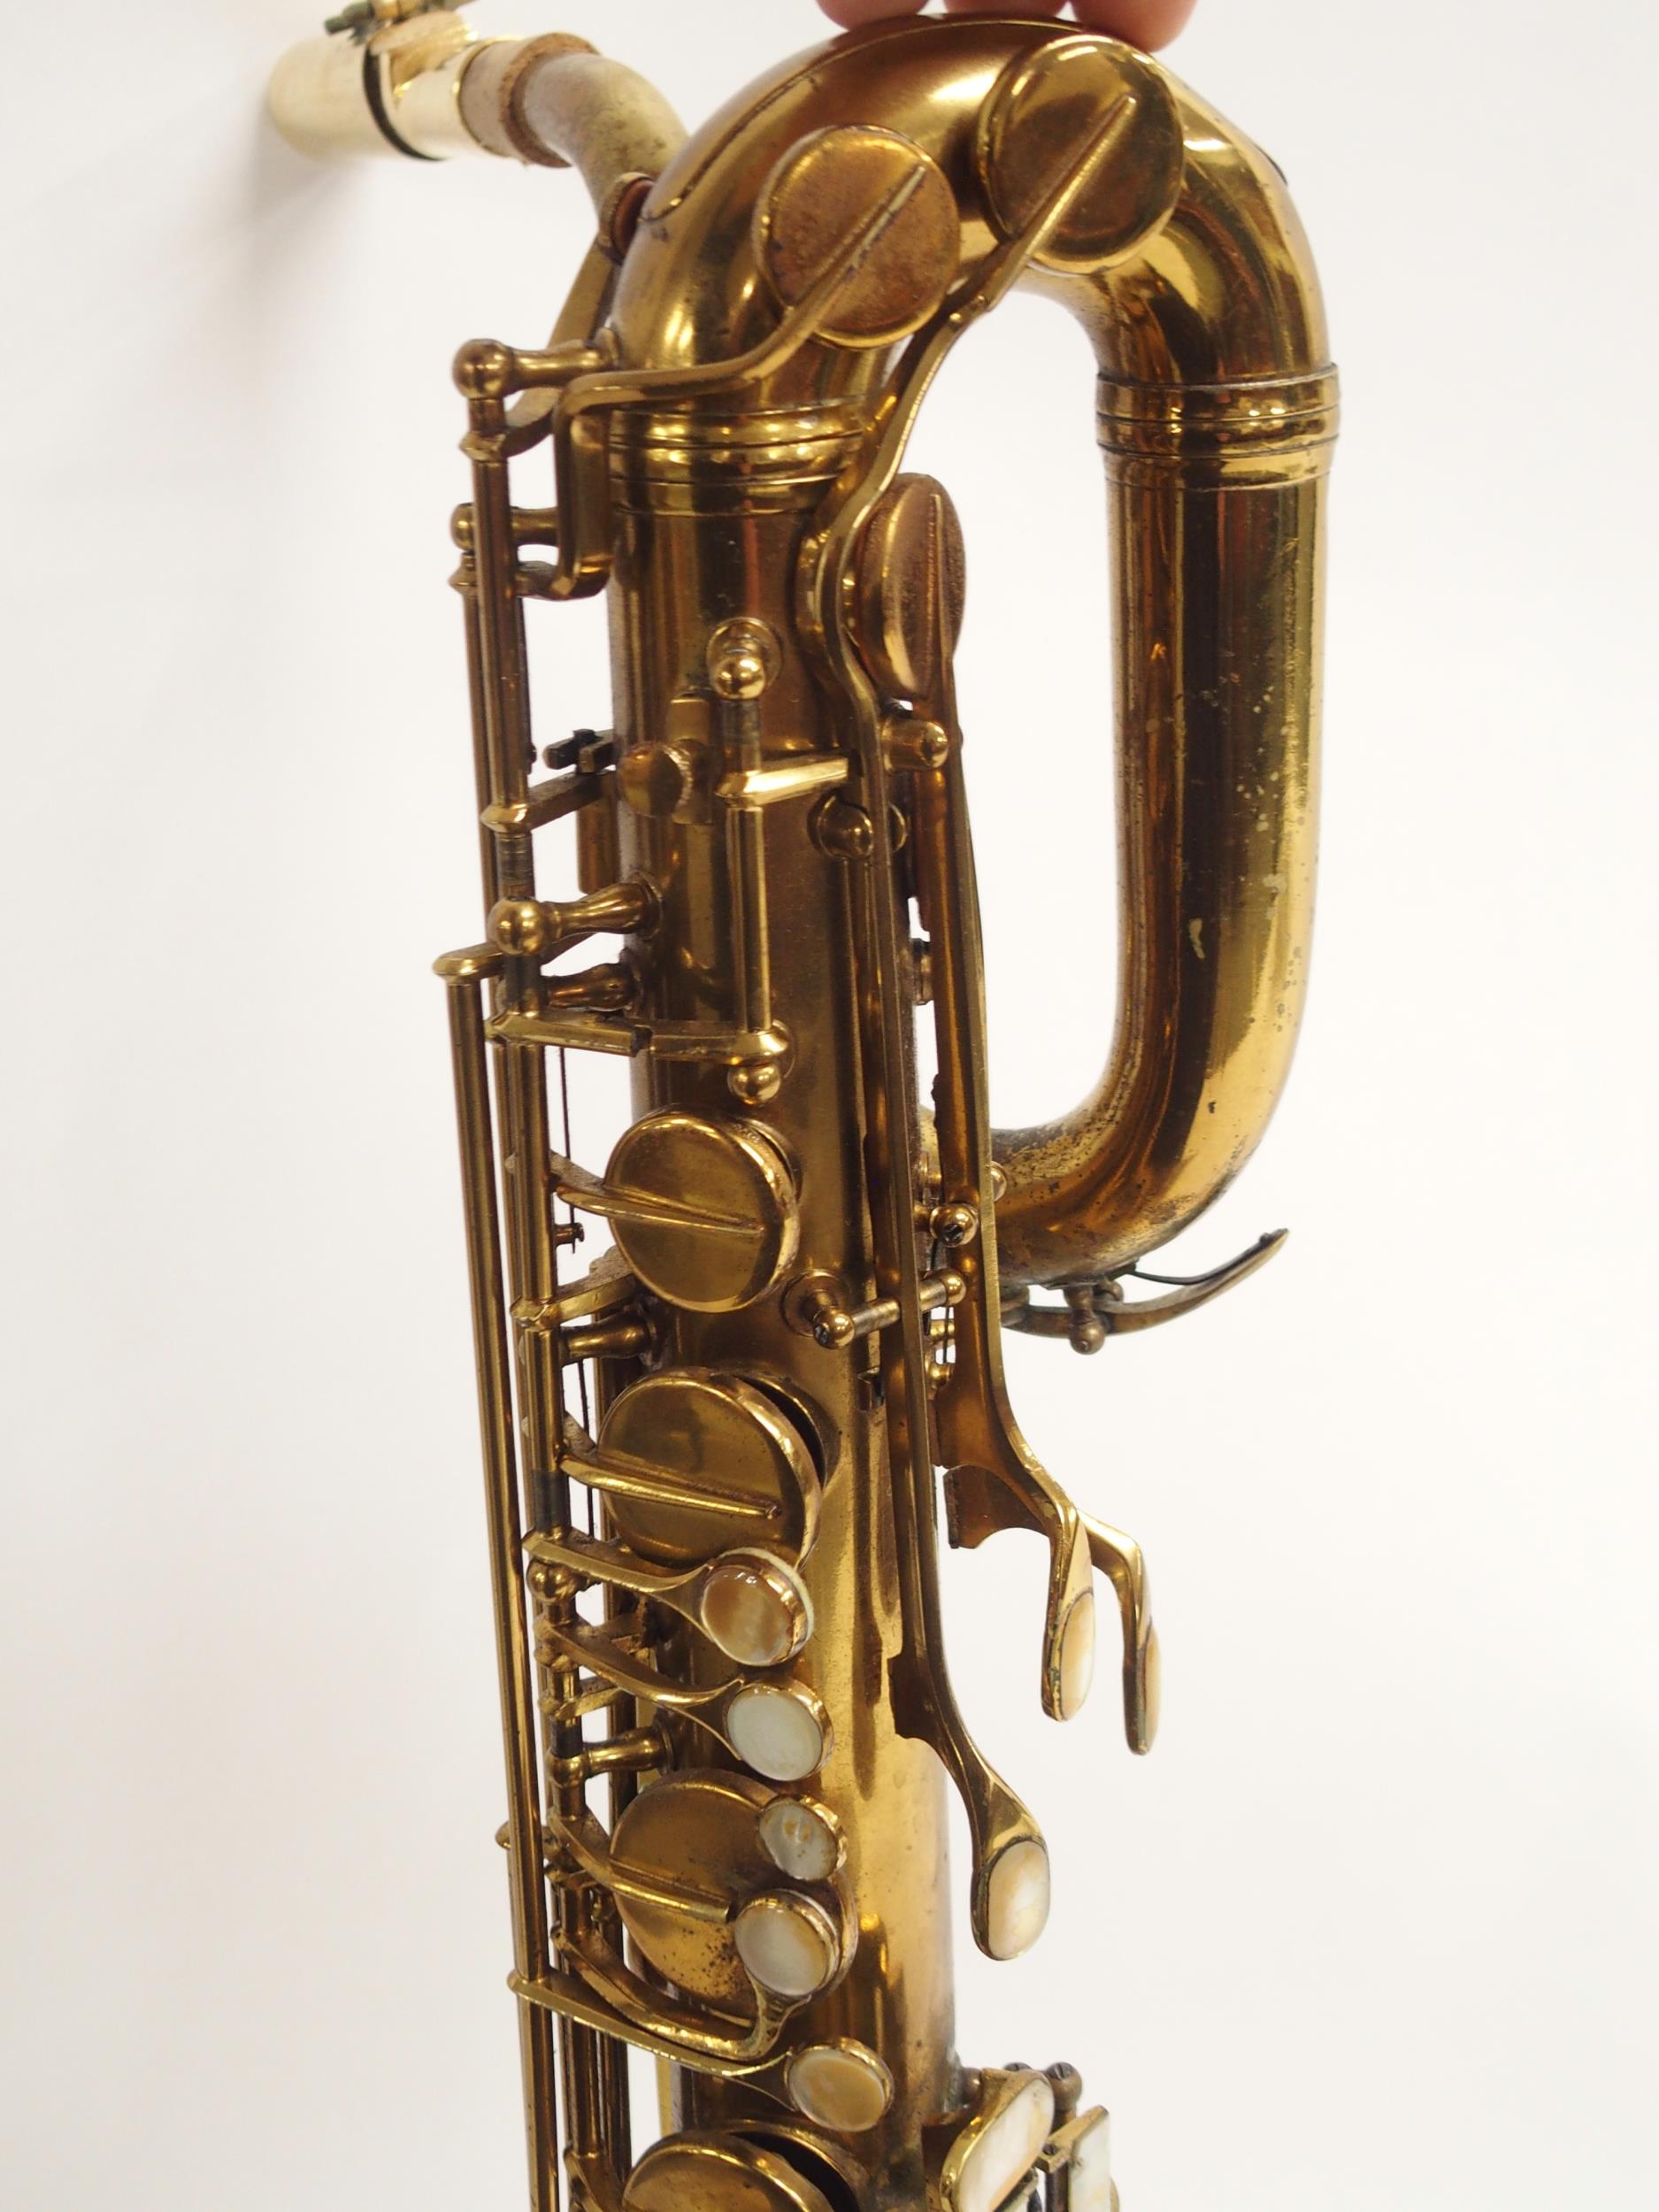 **WITHDRAWN** Pennsylvania Special Baritone Saxophone serial number 261180 engraved "Pensyl - Image 3 of 33